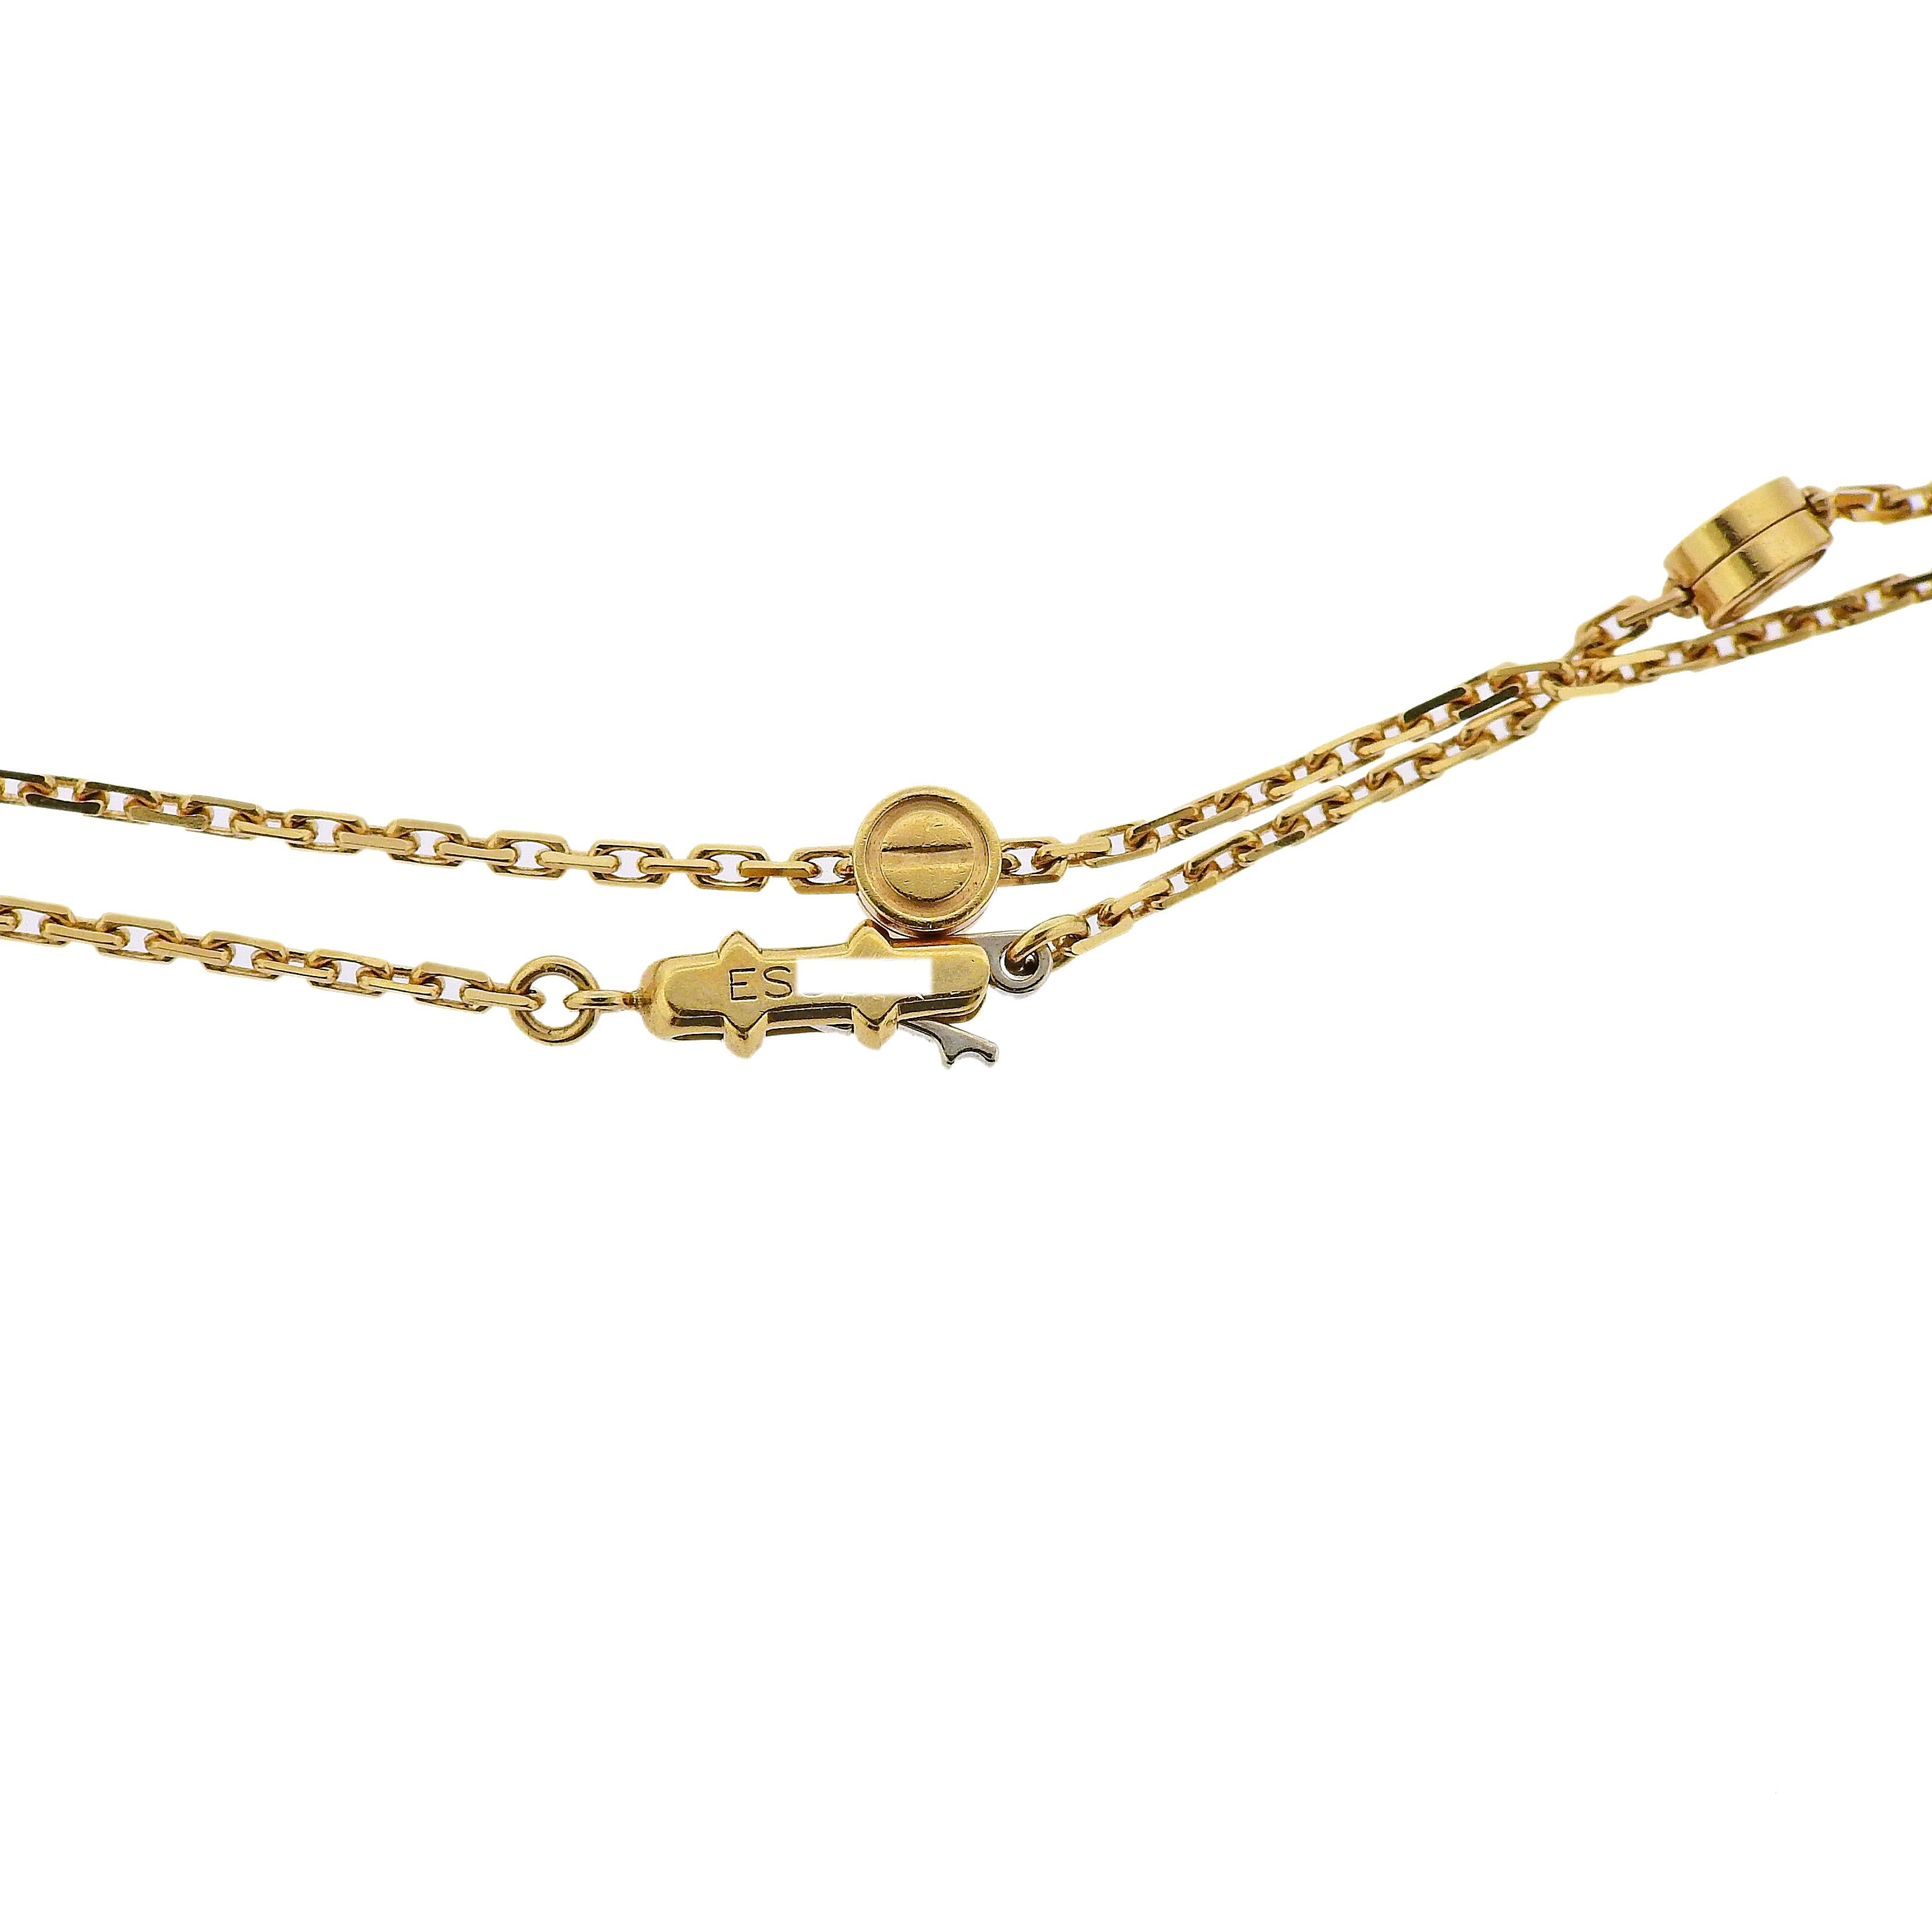 Vintage Cartier Love Station Gold Long Necklace In Excellent Condition For Sale In Lambertville, NJ